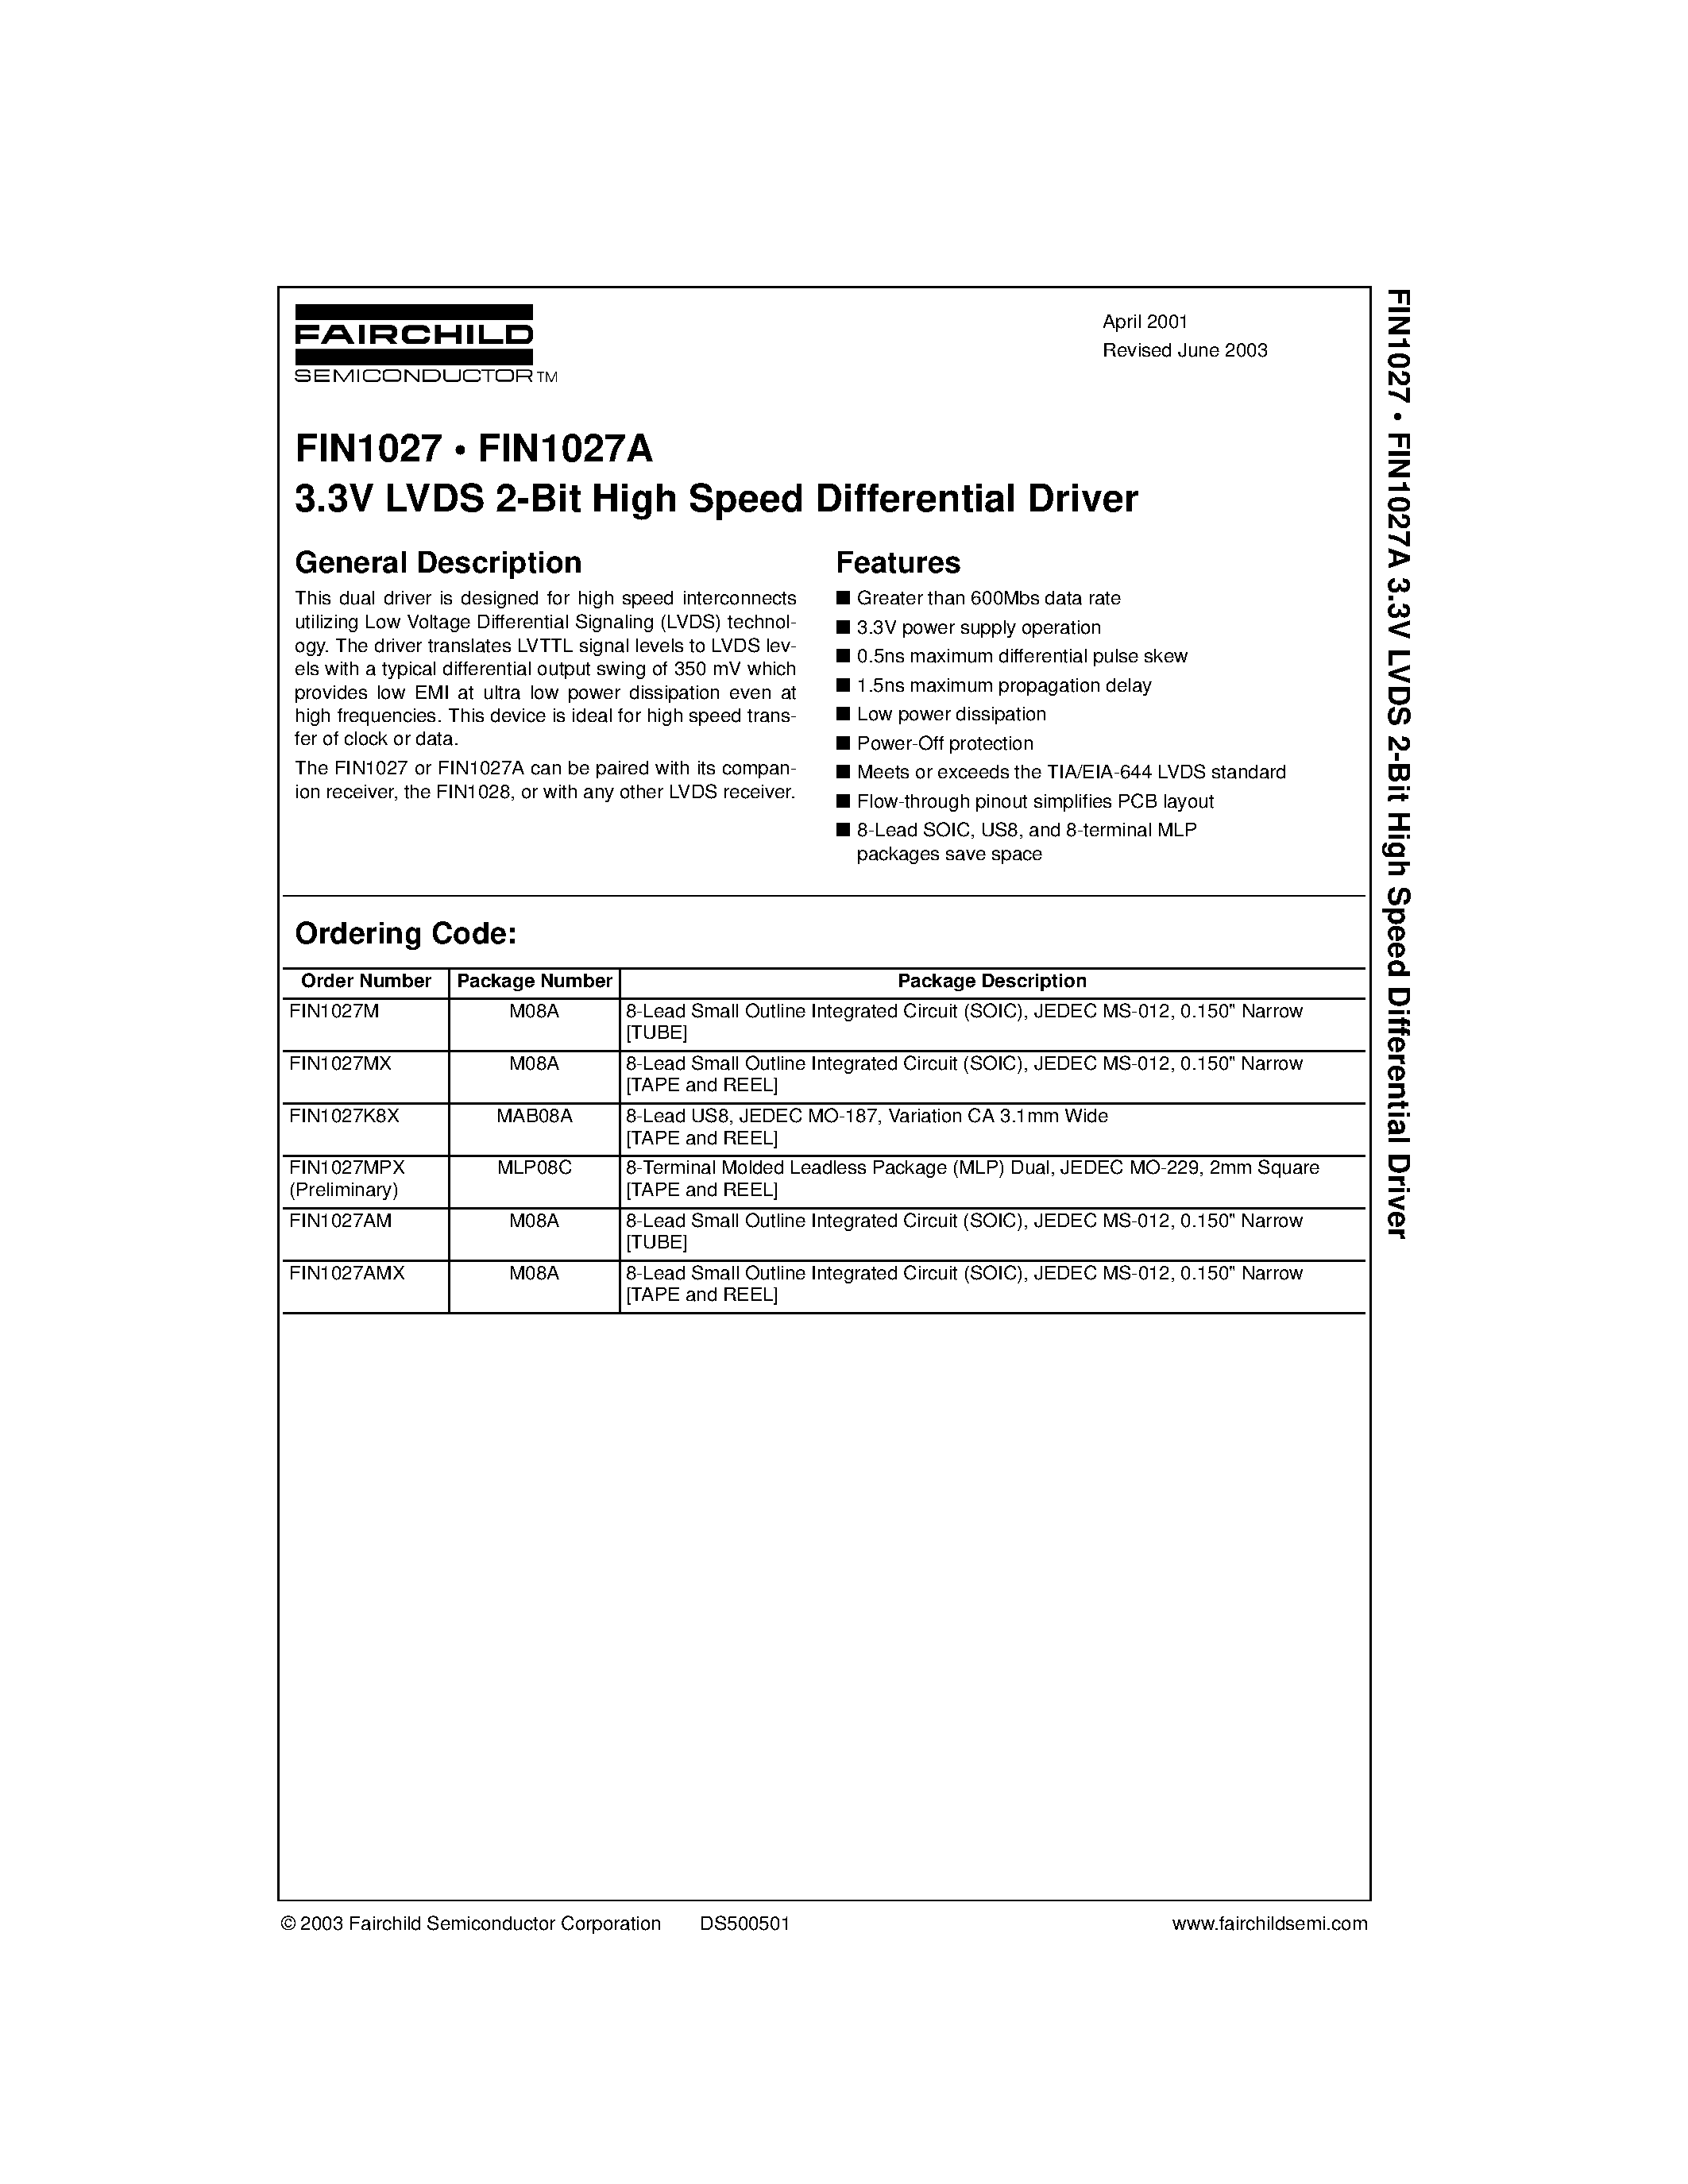 Datasheet FIN1027AM - 3.3V LVDS 2-Bit High Speed Differential Driver page 1